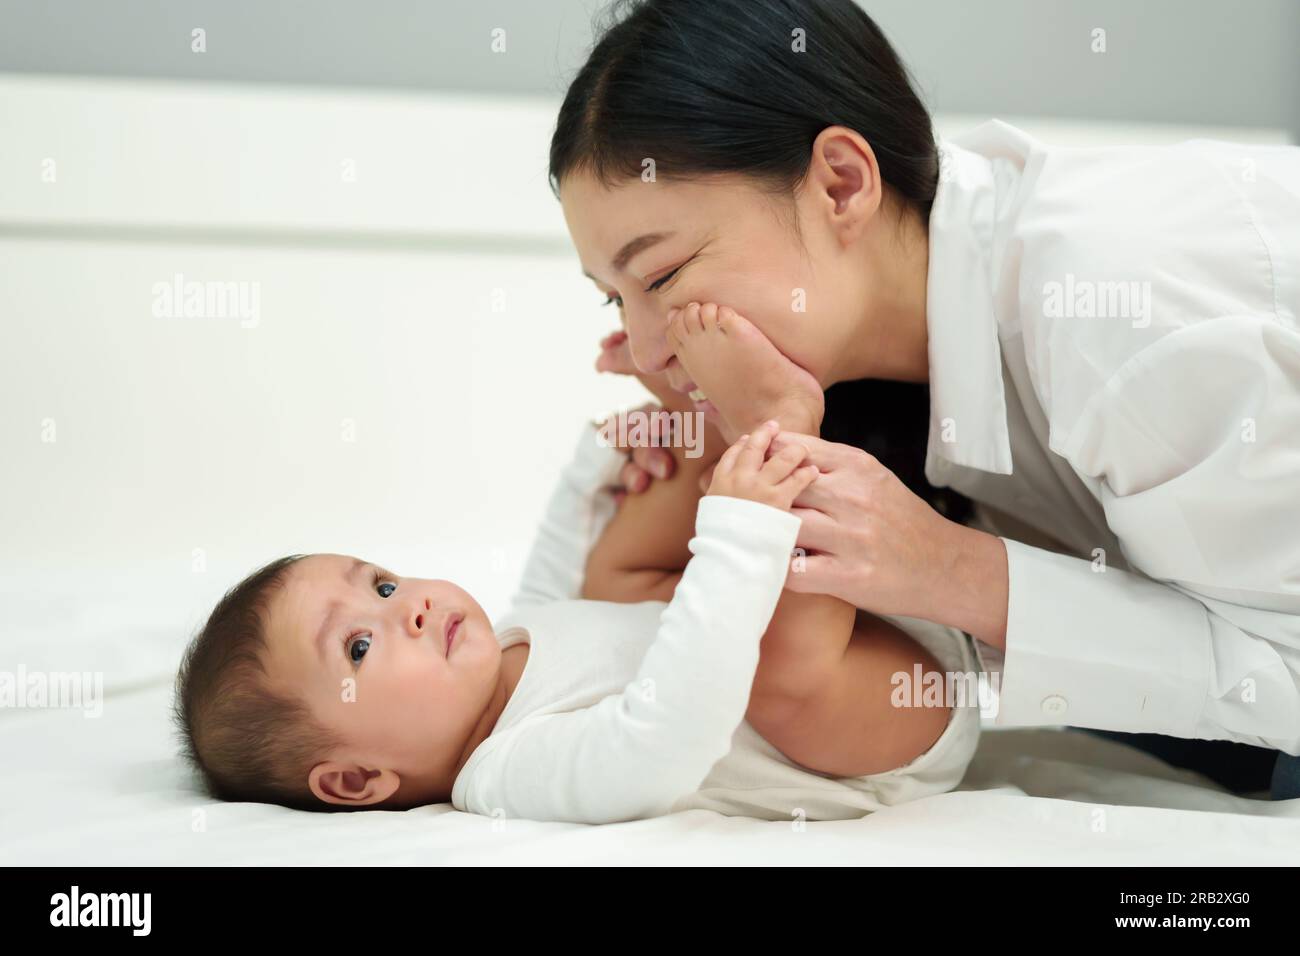 infant baby taps feet on mother's cheek on a bed Stock Photo